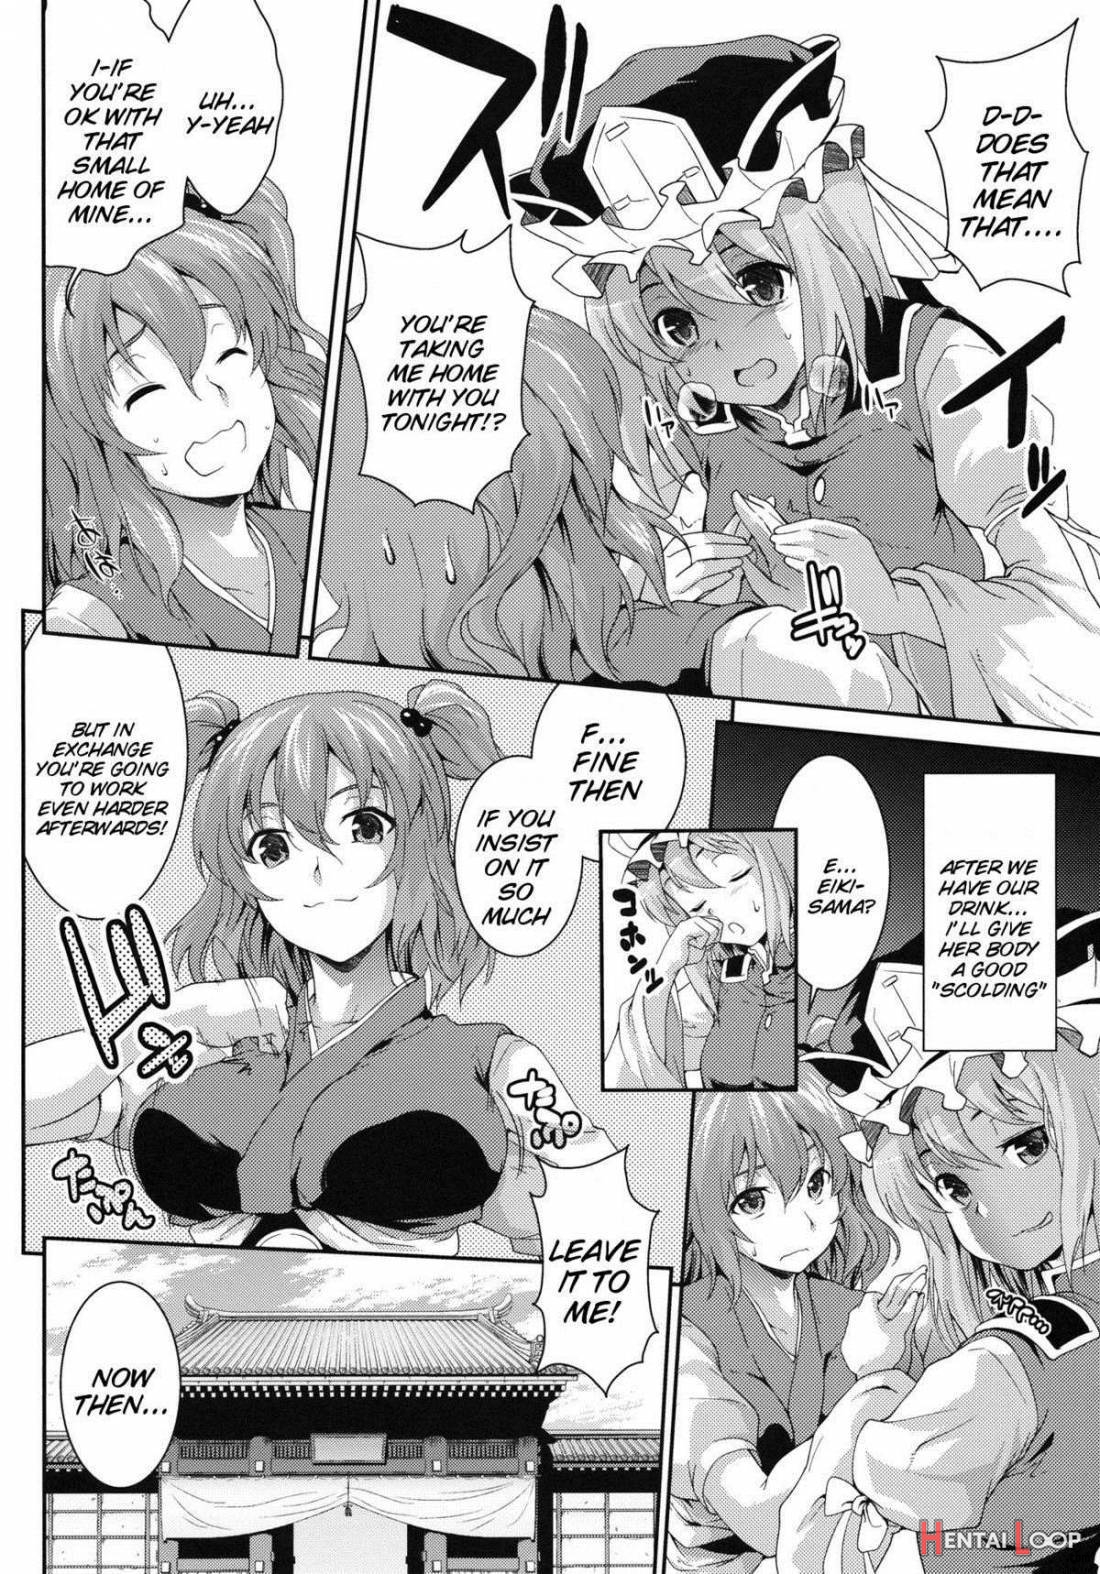 Together With Komachi 3 page 5